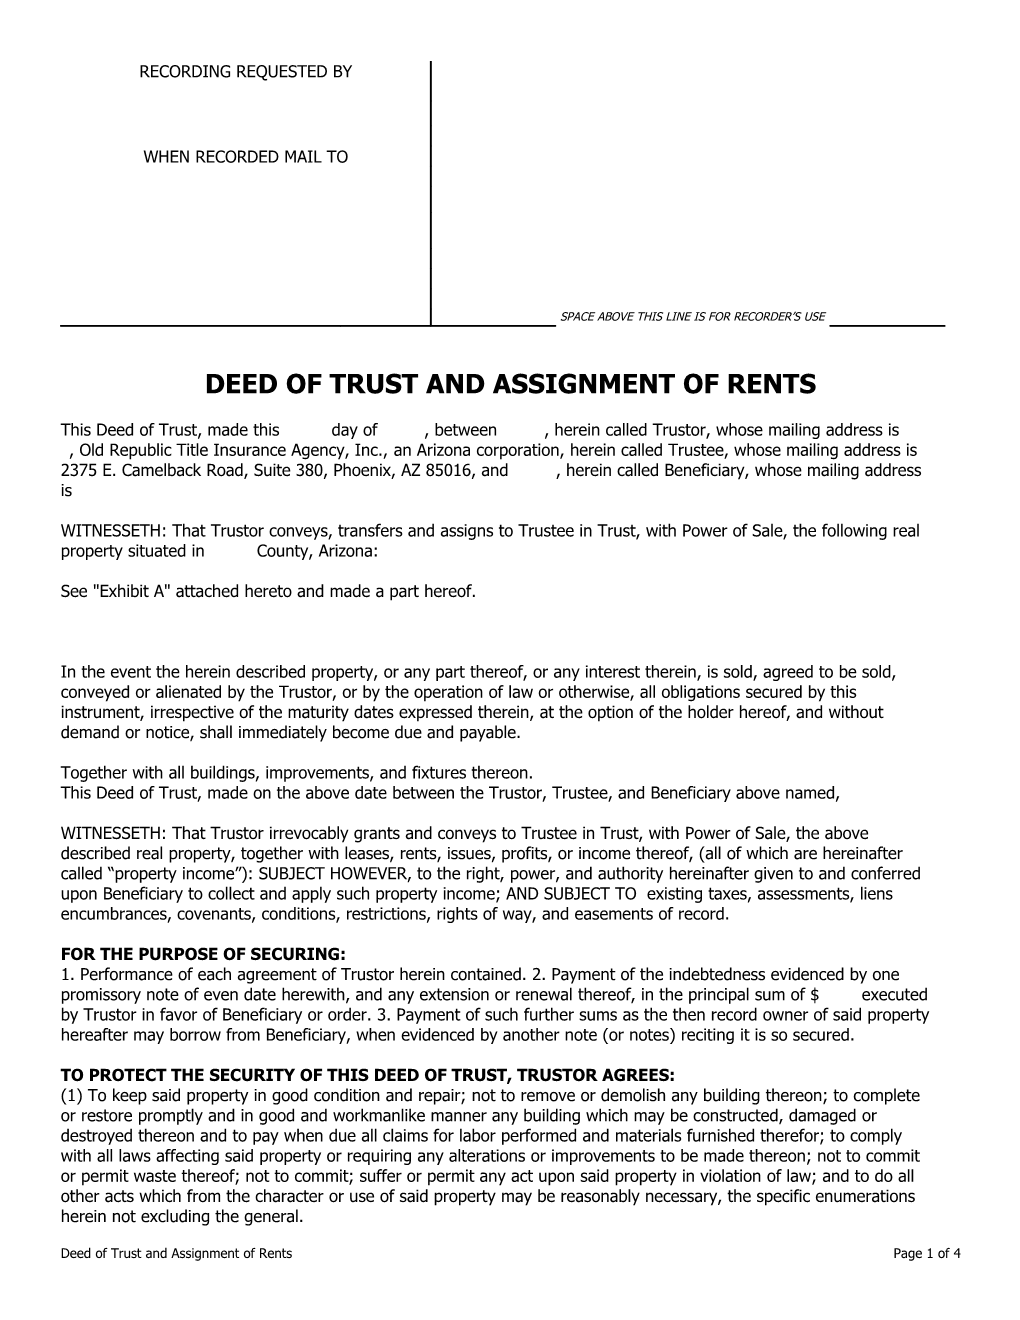 Deed of Trust and Assignment of Rents with Due on Sale